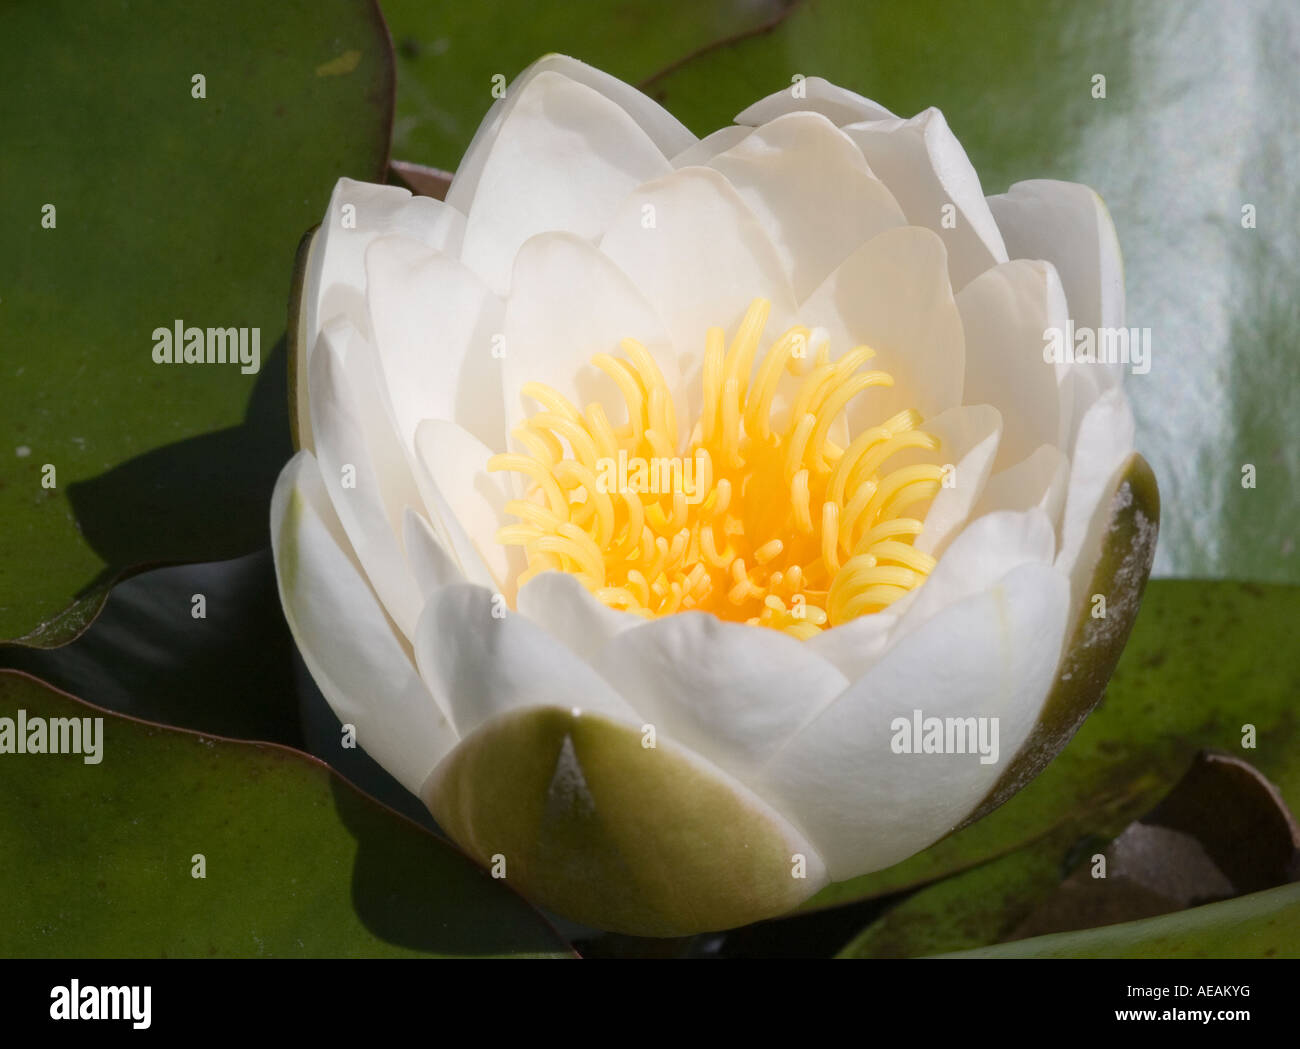 Water Lilly Nymphaea sp Stock Photo